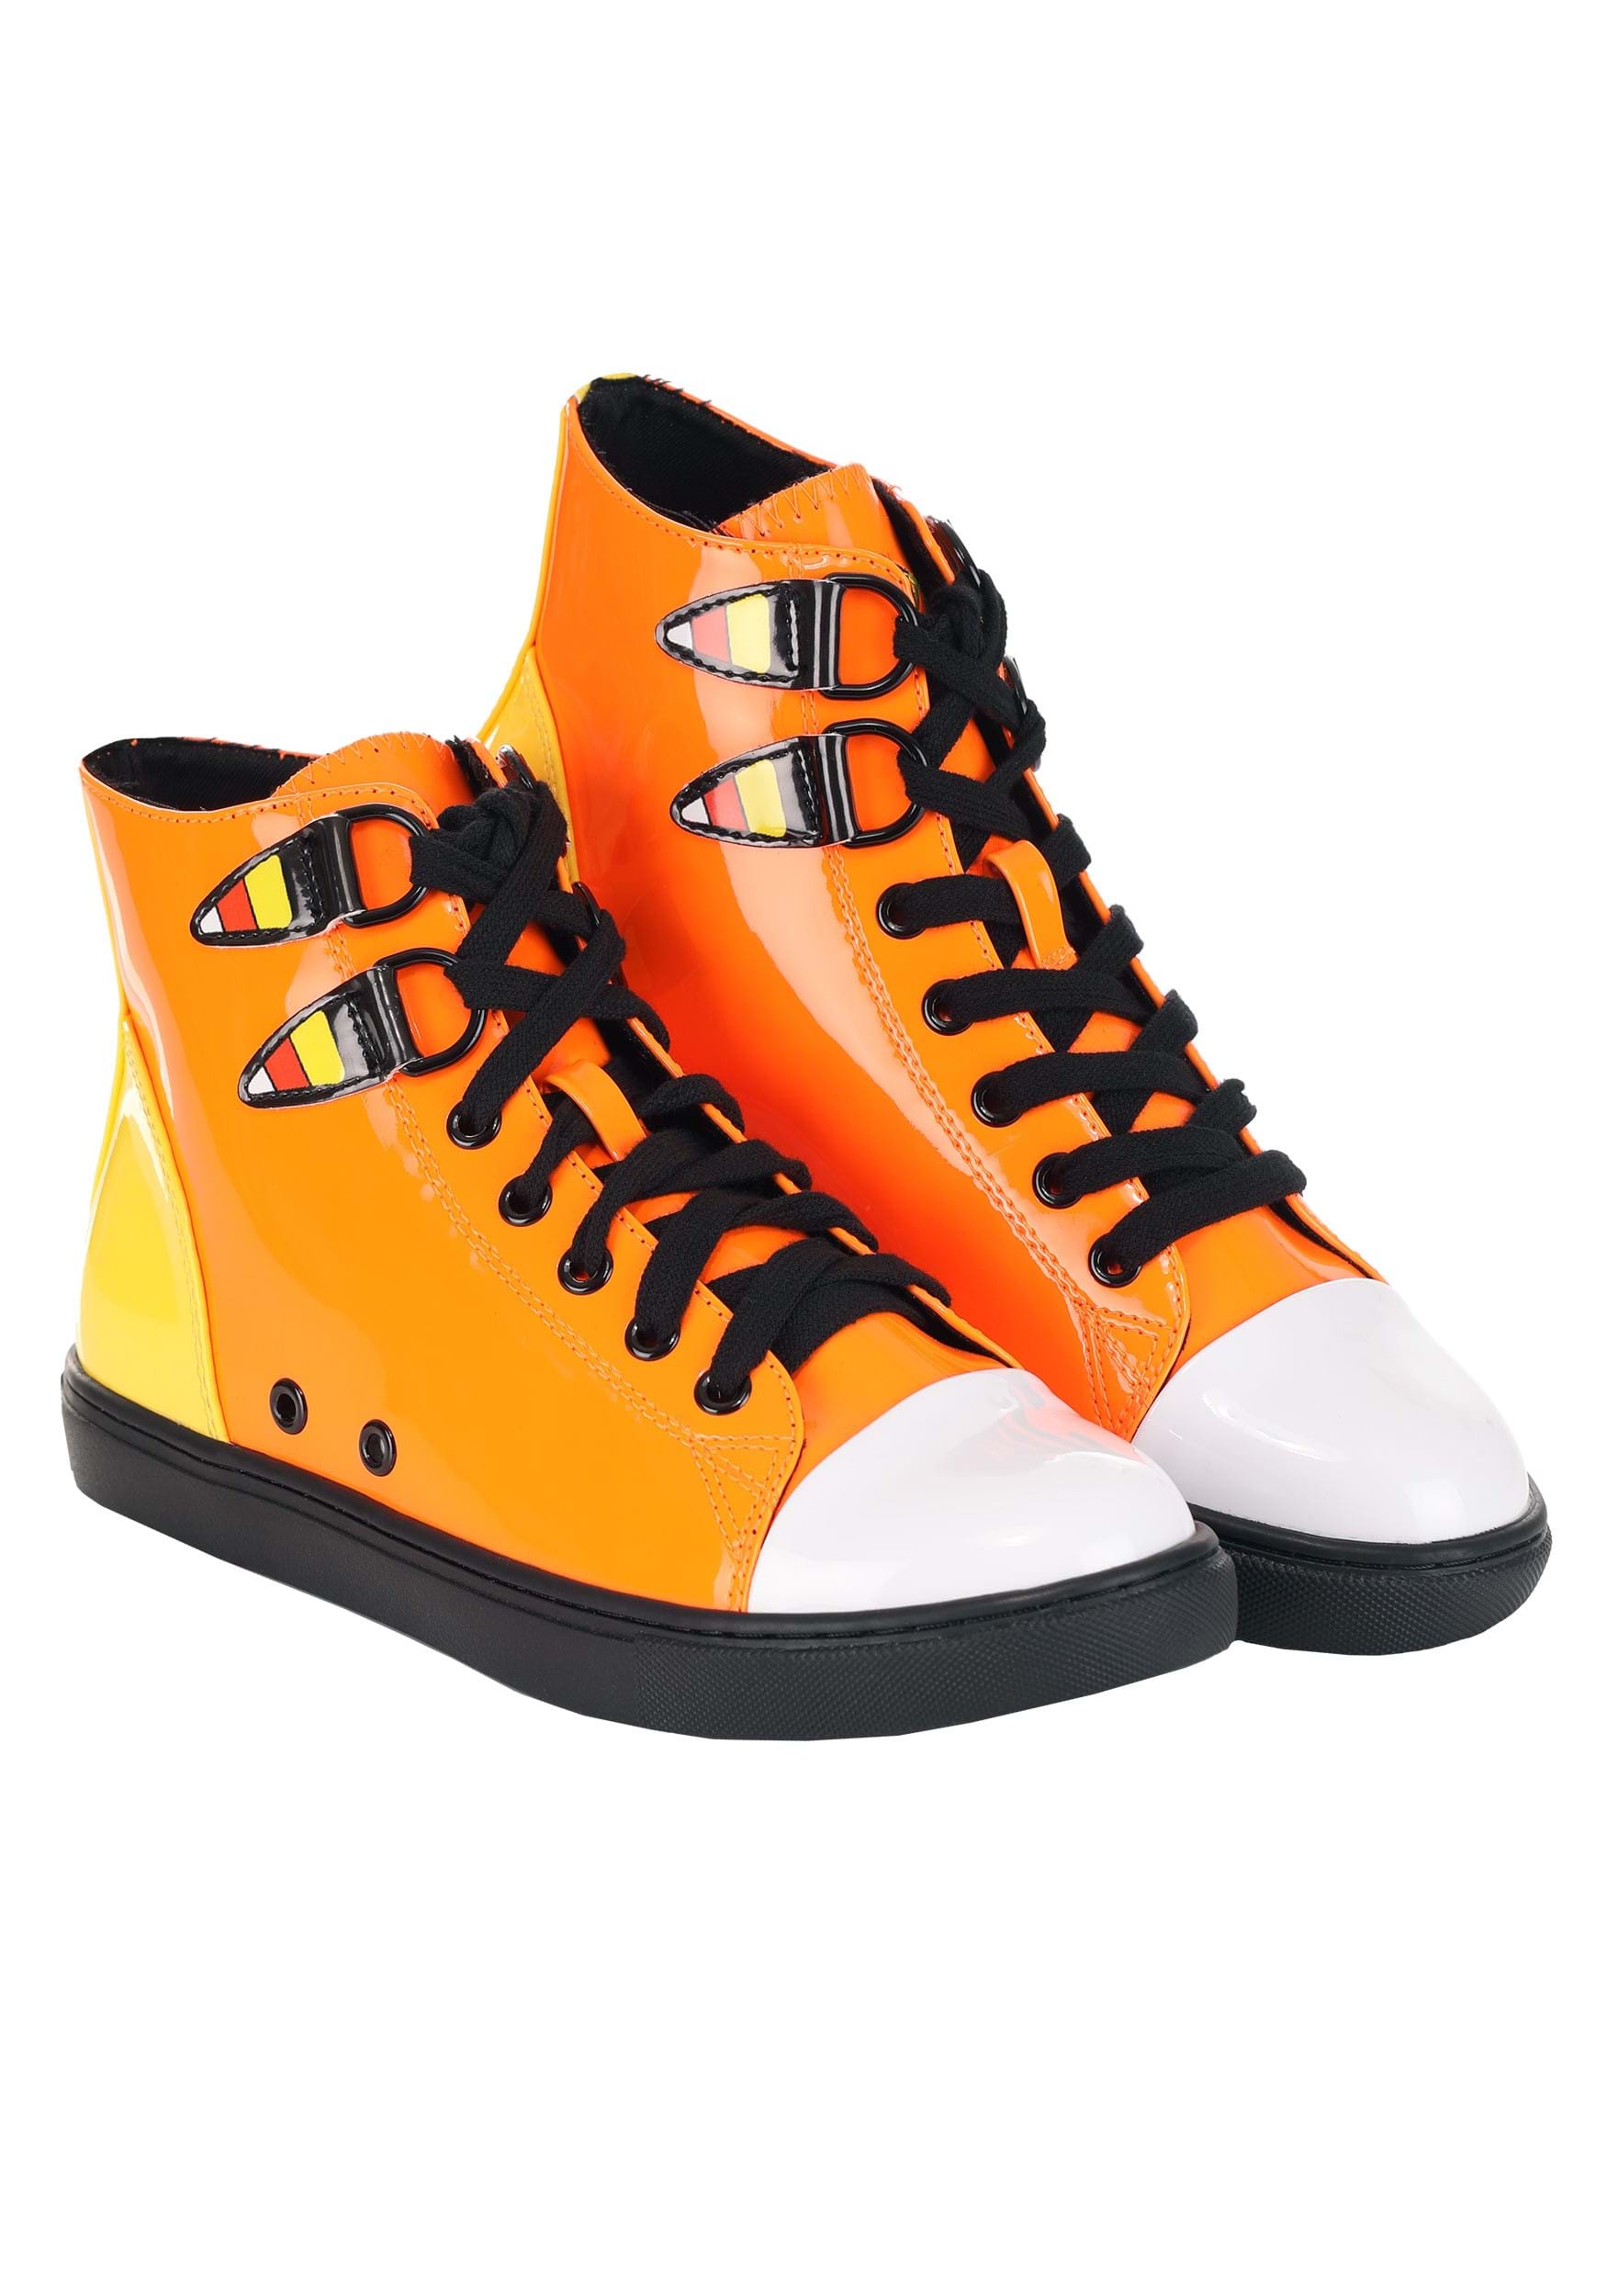 Image of Candy Corn Chelsea Patent High Top Sneakers ID SVCHELSEA-CORN-7